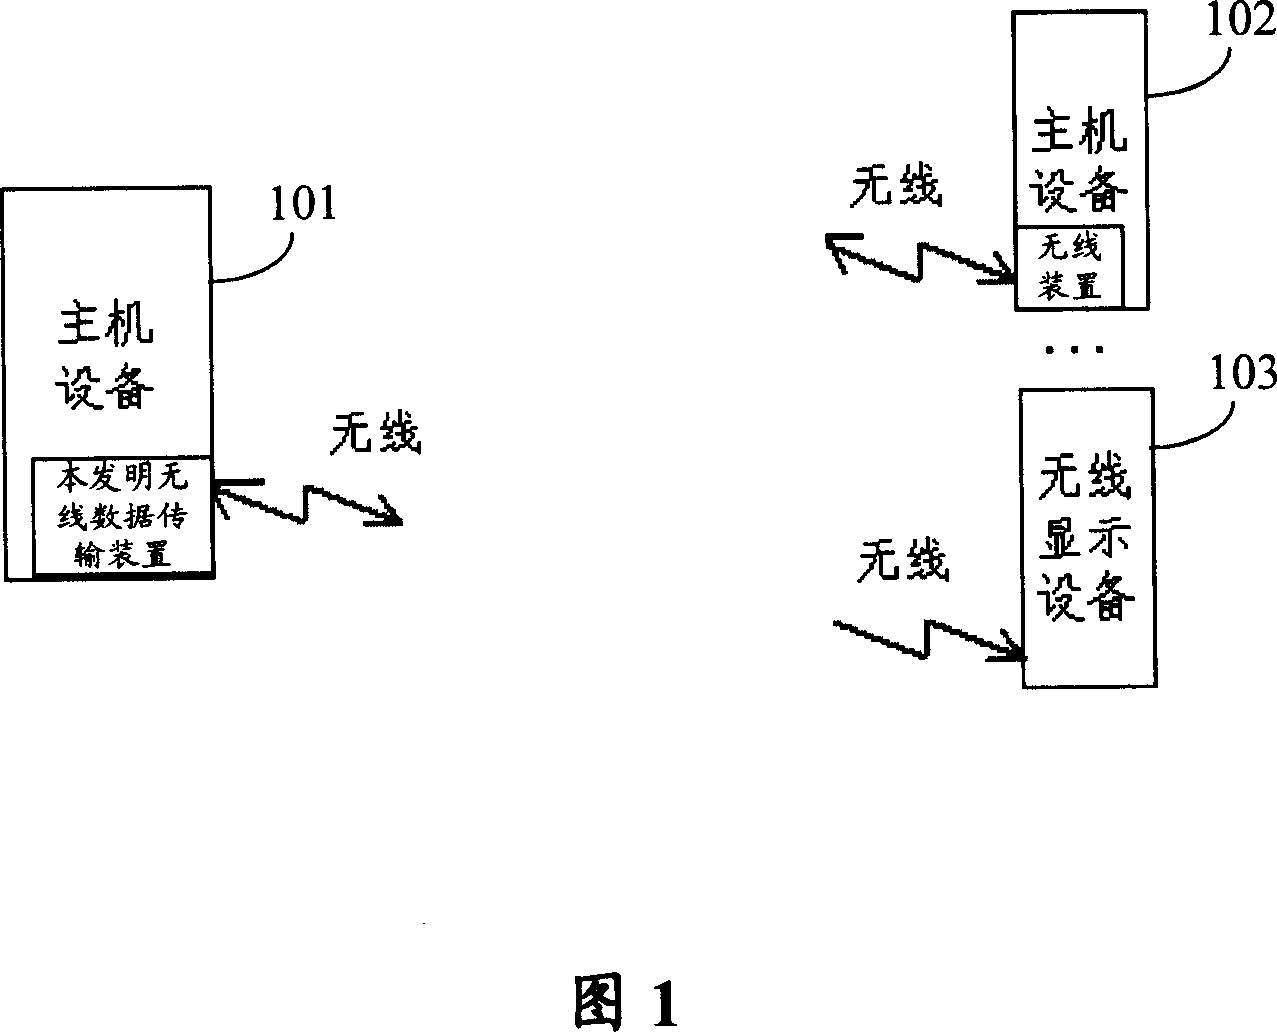 Radio data transmission device and method and display module